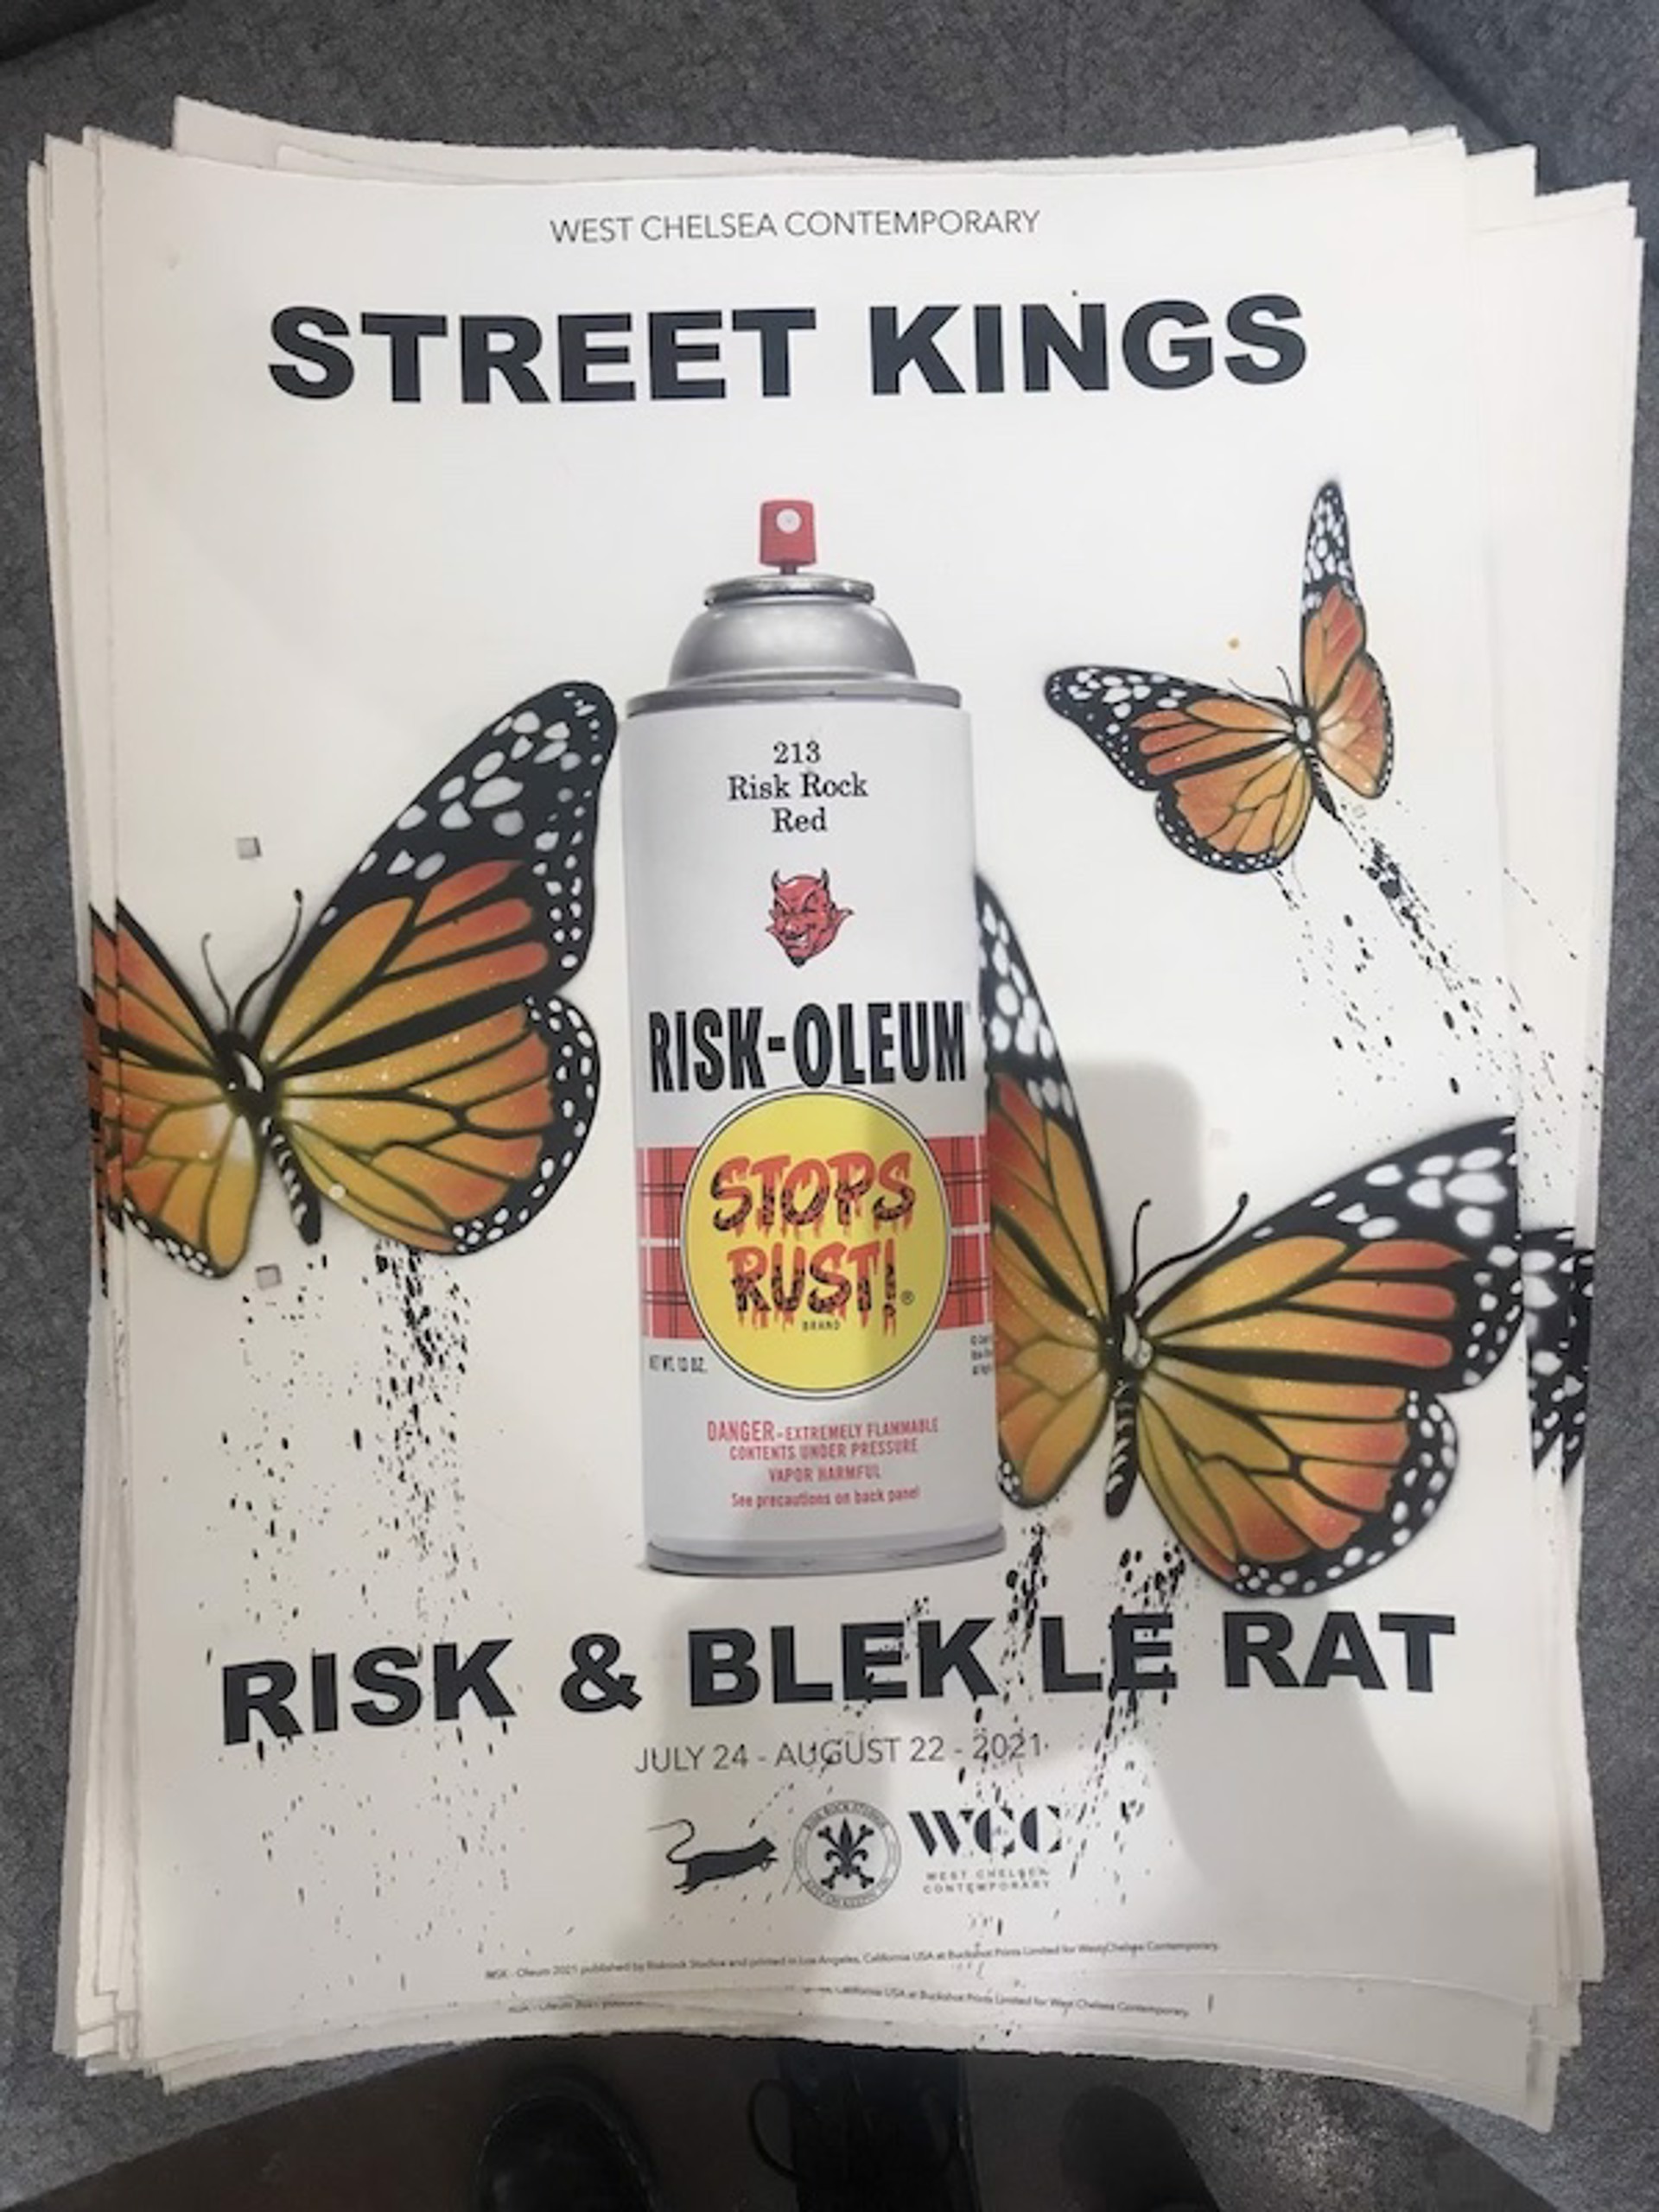 Street Kings Show Print (41/50) by Risk